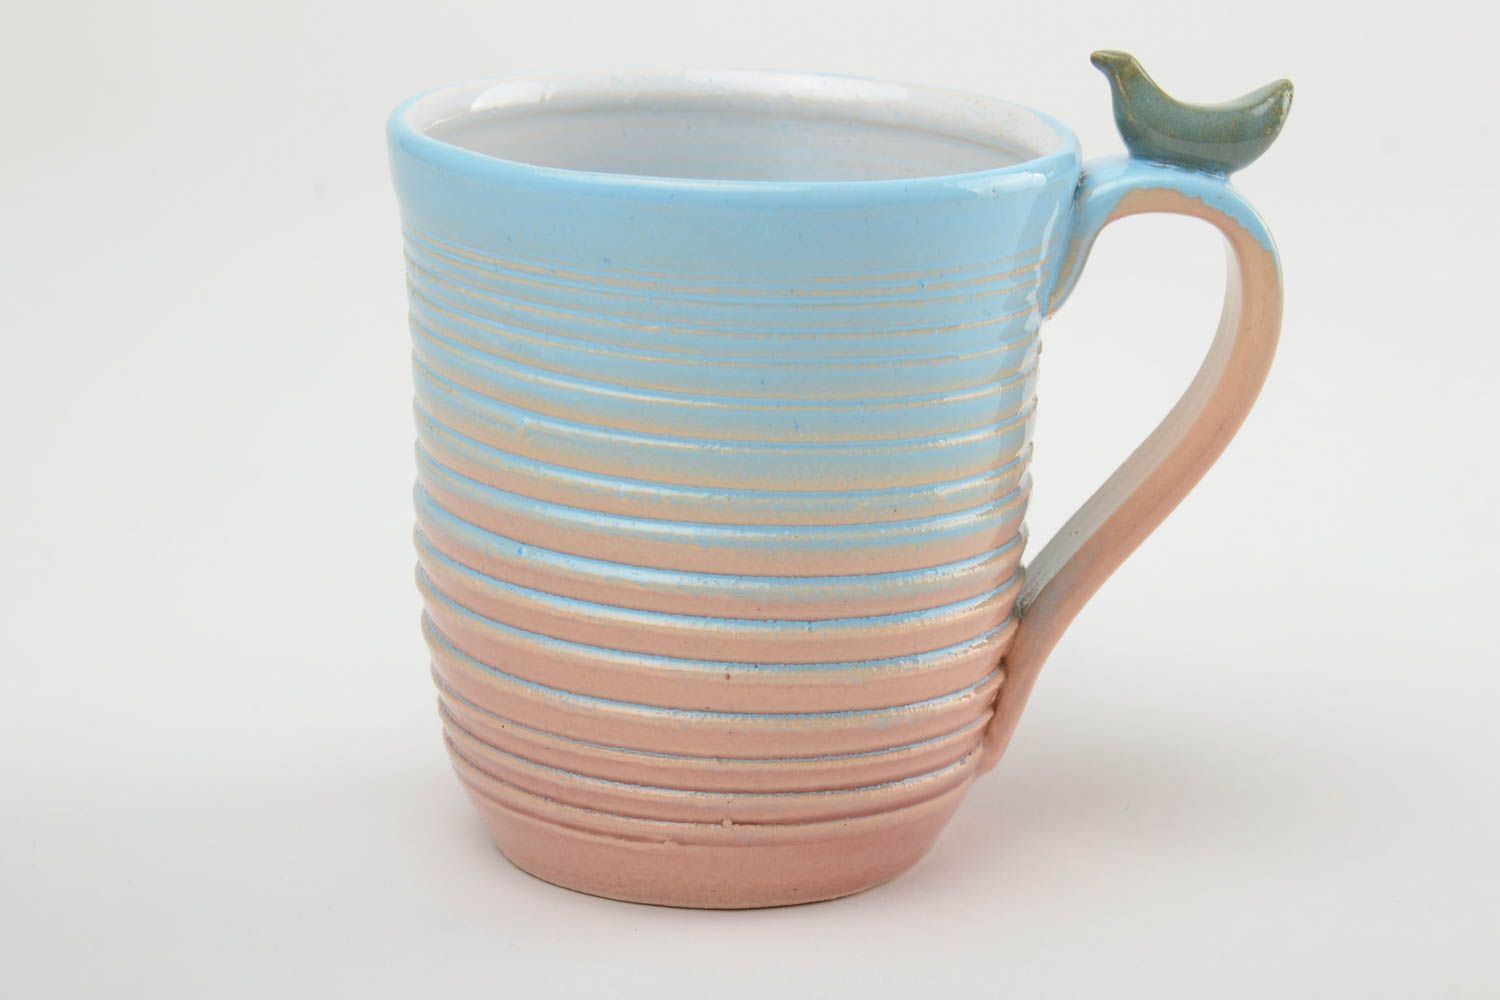 10 oz porcelain handmade drinking cup in blue, white, and beige colors with handle photo 2